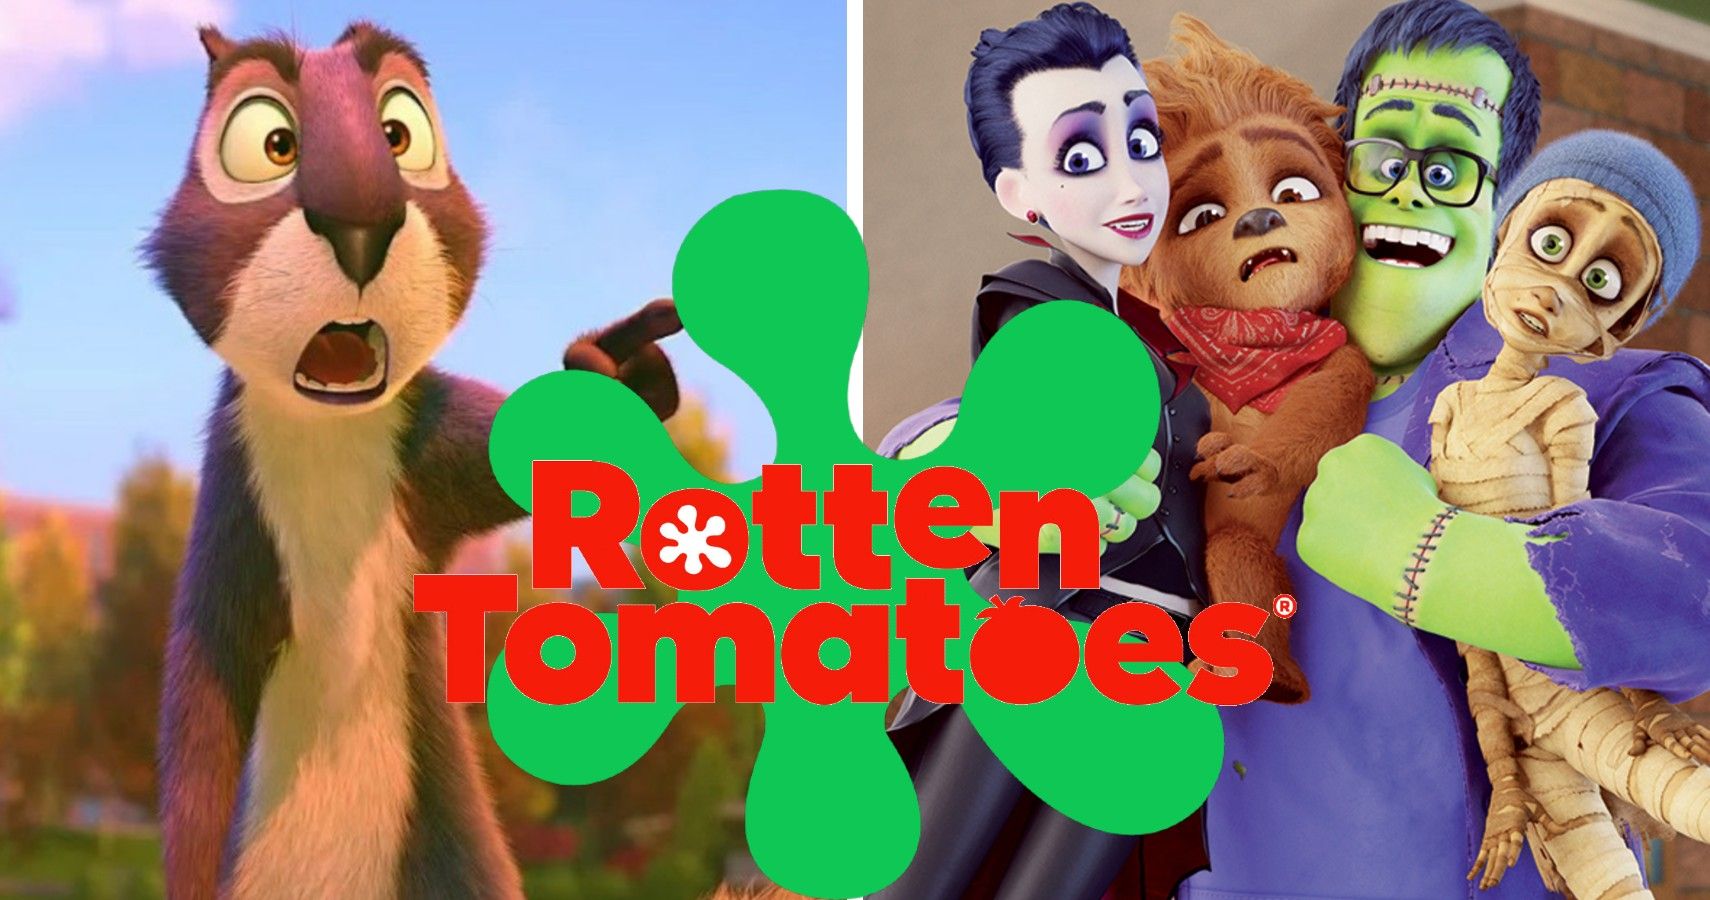 The 10 Worst-Rated Animated Movies Of All Time, According To Rotten Tomatoes